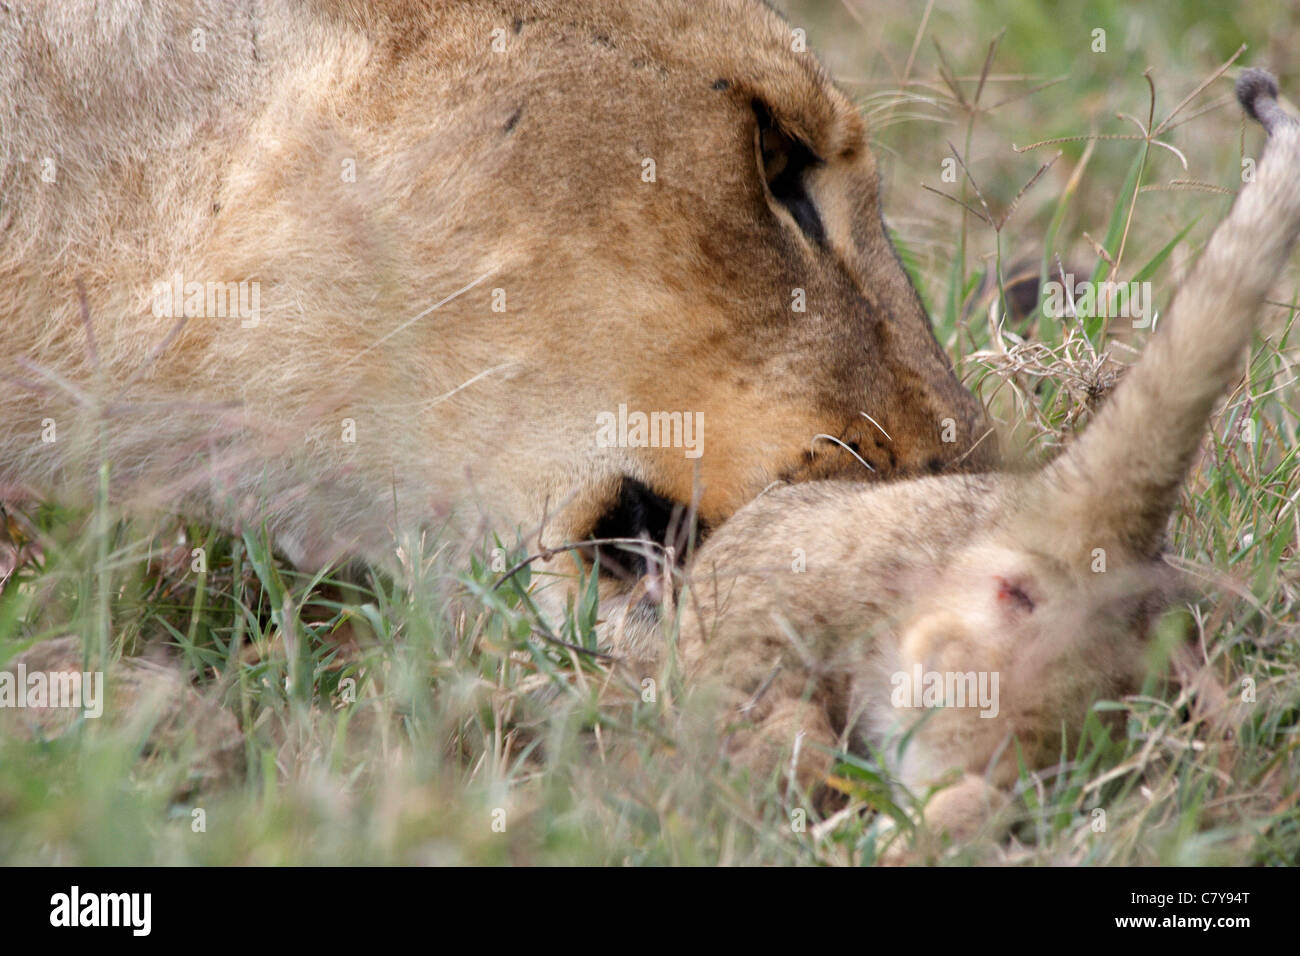 Lion mother caring for lion baby cub (Panthera leo) Stock Photo